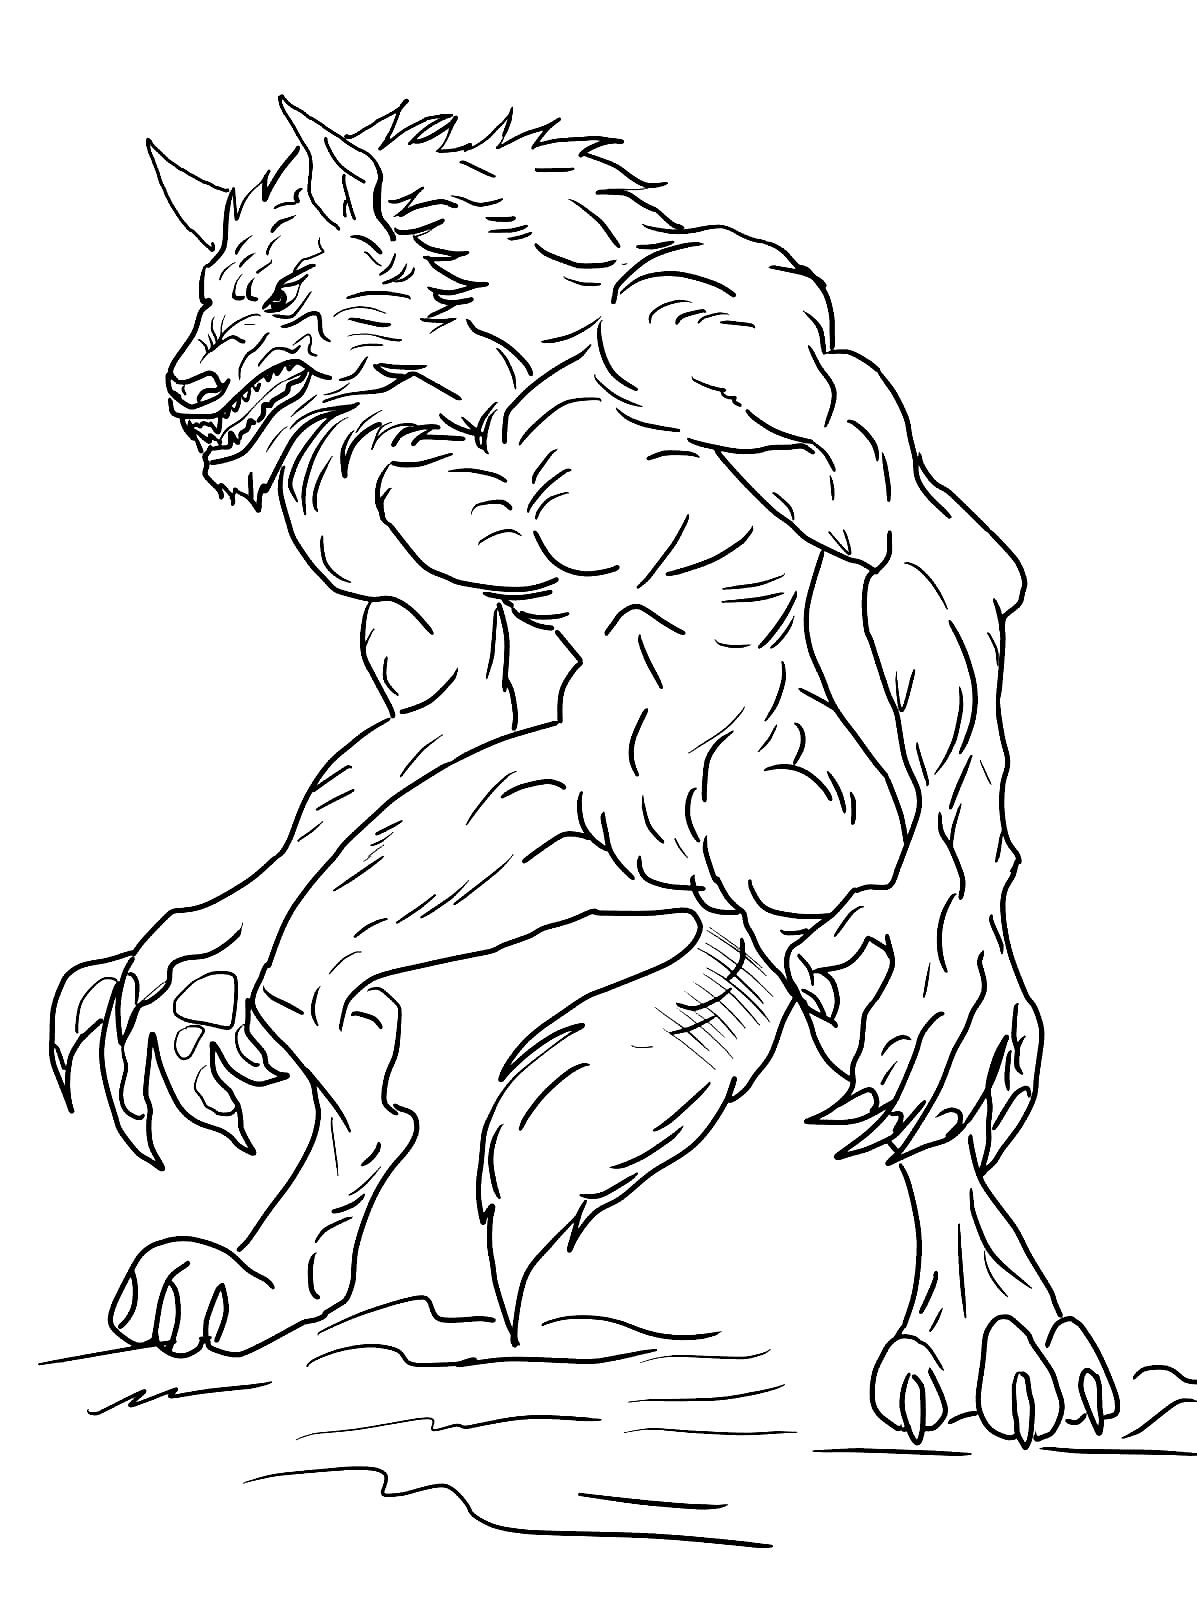 Free Scary Werewolf Coloring Page